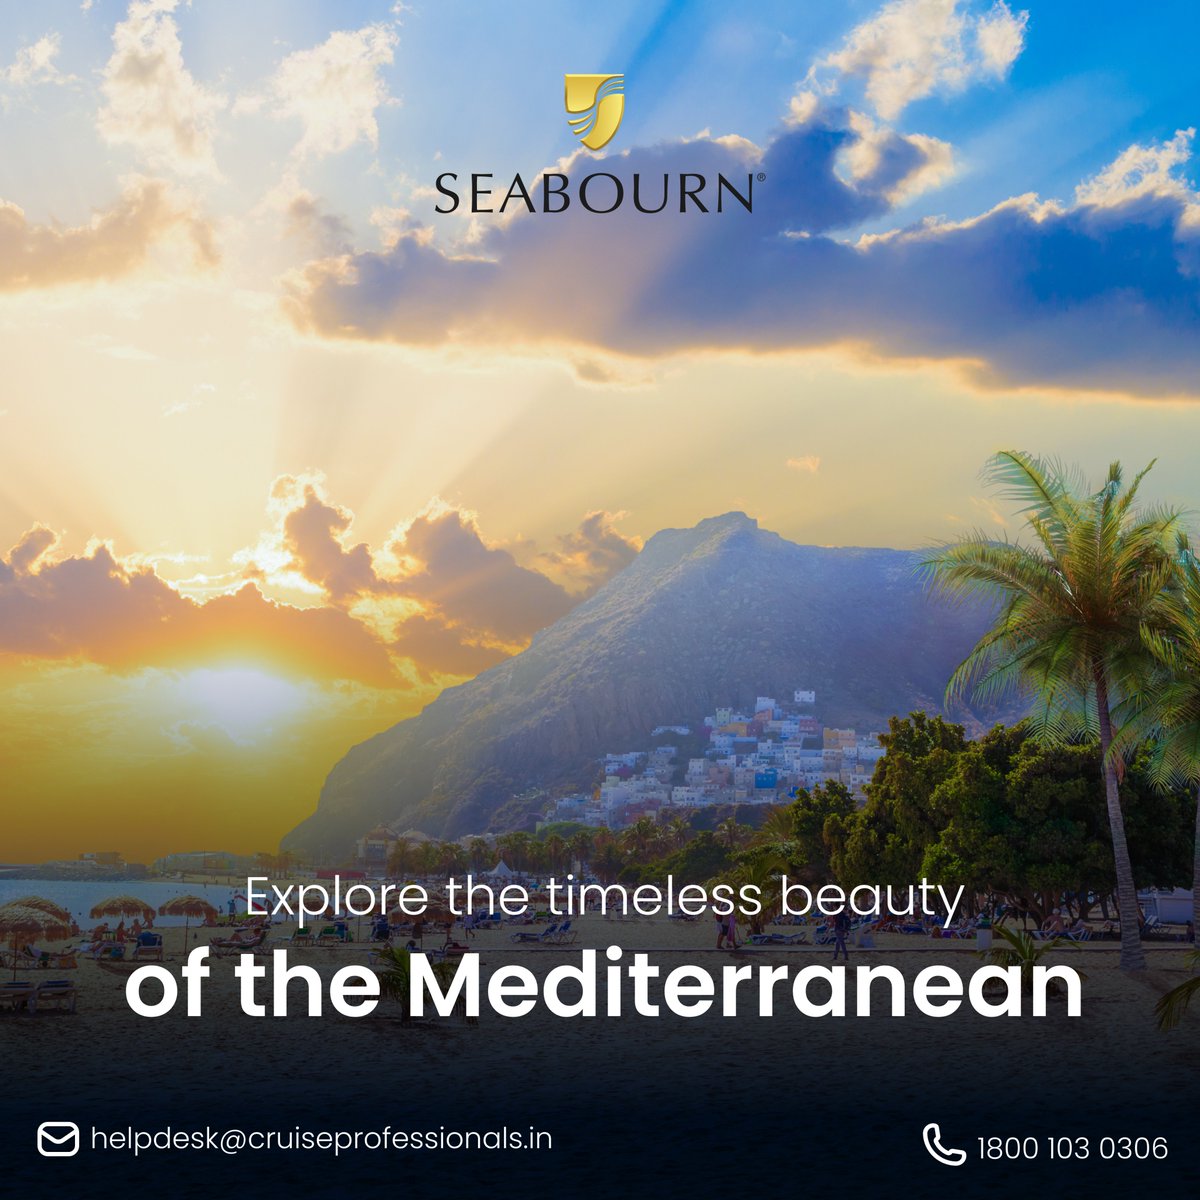 Explore the timeless beauty of Mediterranean onboard Seabourn Quest. 

#seabourn #cruiseprofessionals #mediterranean #luxury #seabournquest #luxurytravel #luxurycruise #seabournmoments